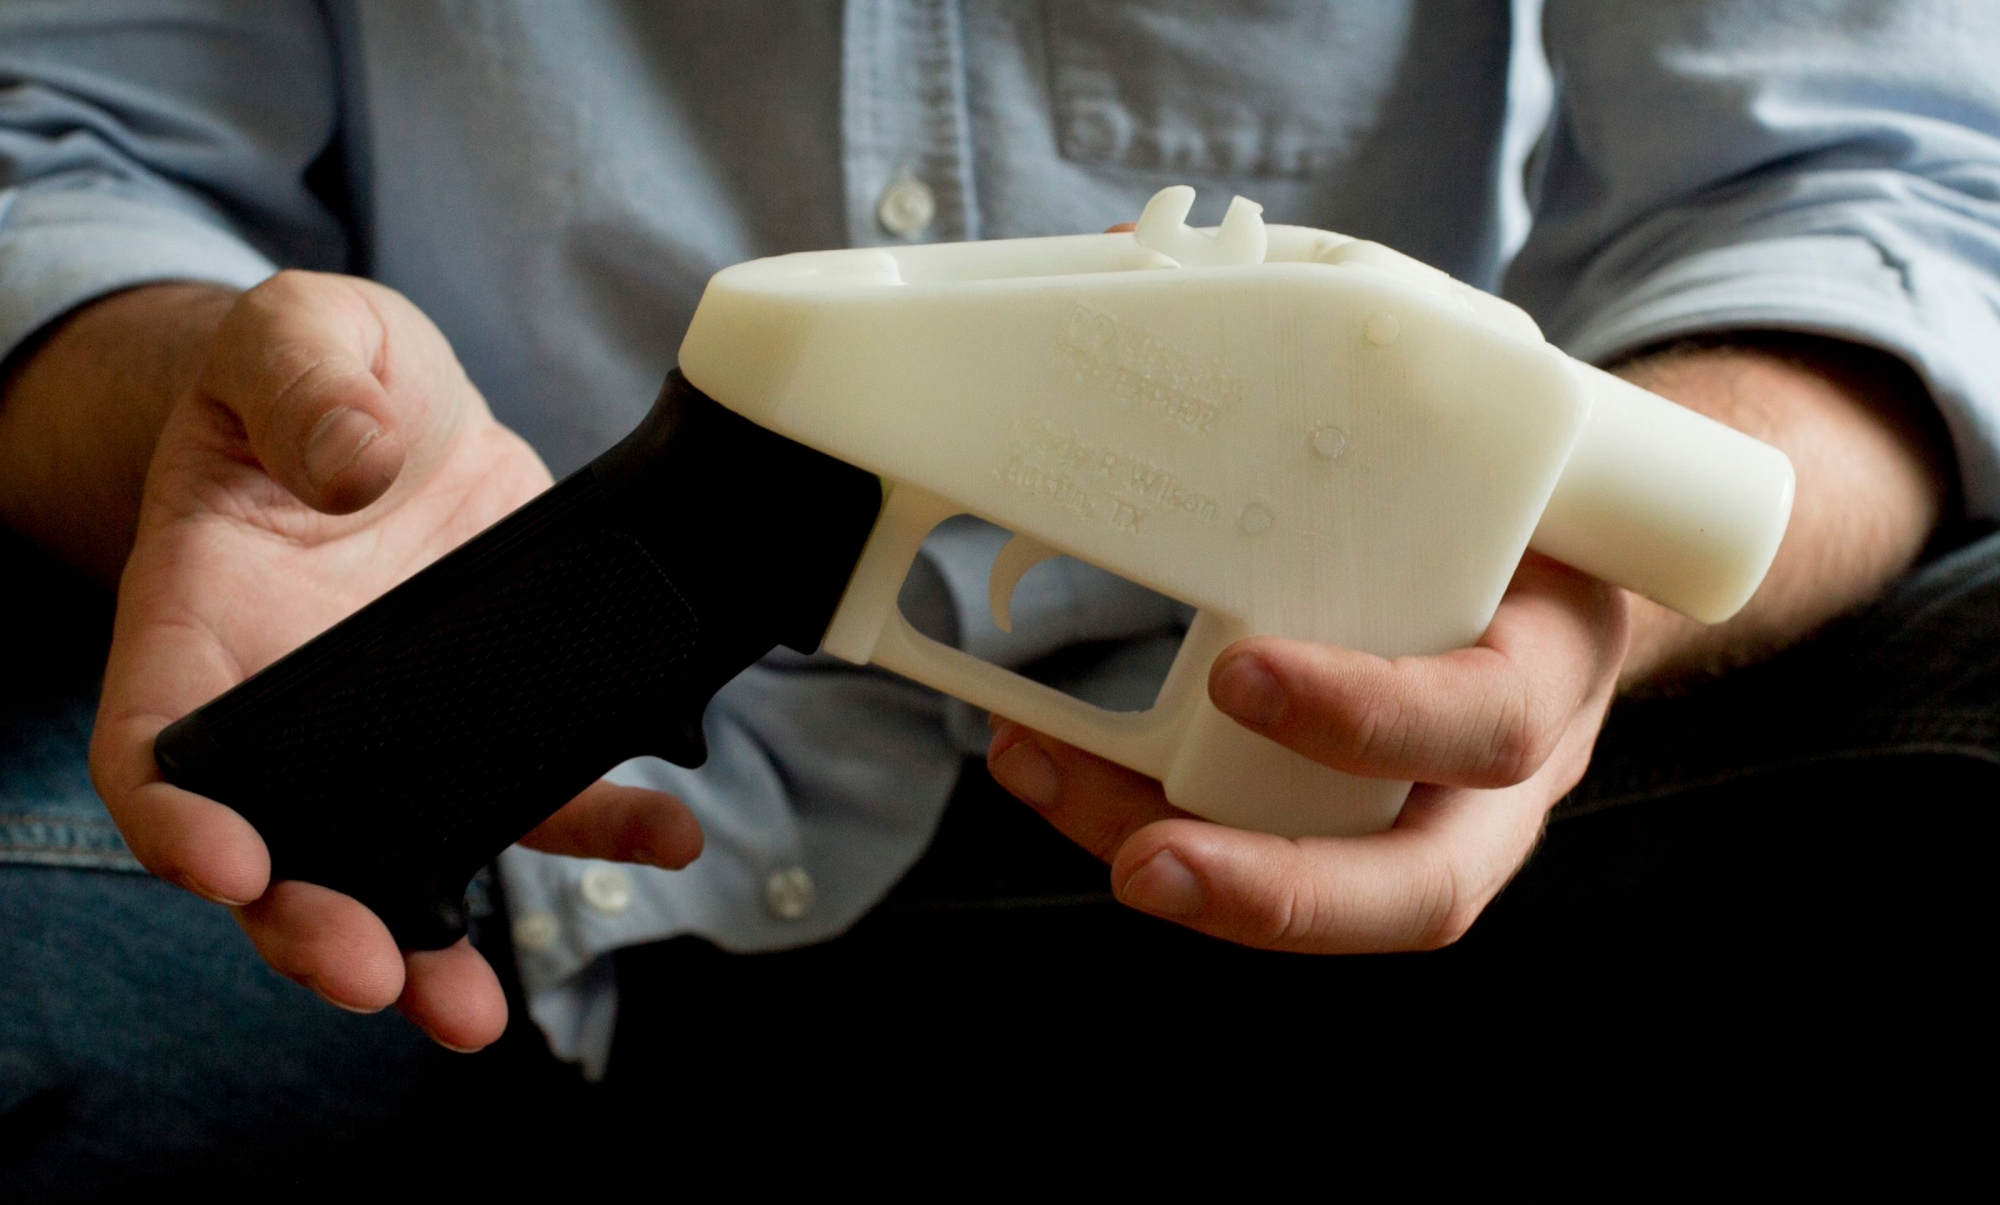 FILE - In this May 10, 2013, file photo, Cody Wilson holds what he calls a Liberator pistol that was completely made on a 3-D-printer at his home in Austin, Texas. Eight states filed suit Monday, July 30, 2018, against the Trump administration over its decision to allow a Texas company to publish downloadable blueprints for a 3D-printed gun, contending the hard-to-trace plastic weapons are a boon to terrorists and criminals and threaten public safety. (Jay Janner/Austin American-Statesman via AP, File) 3D Guns